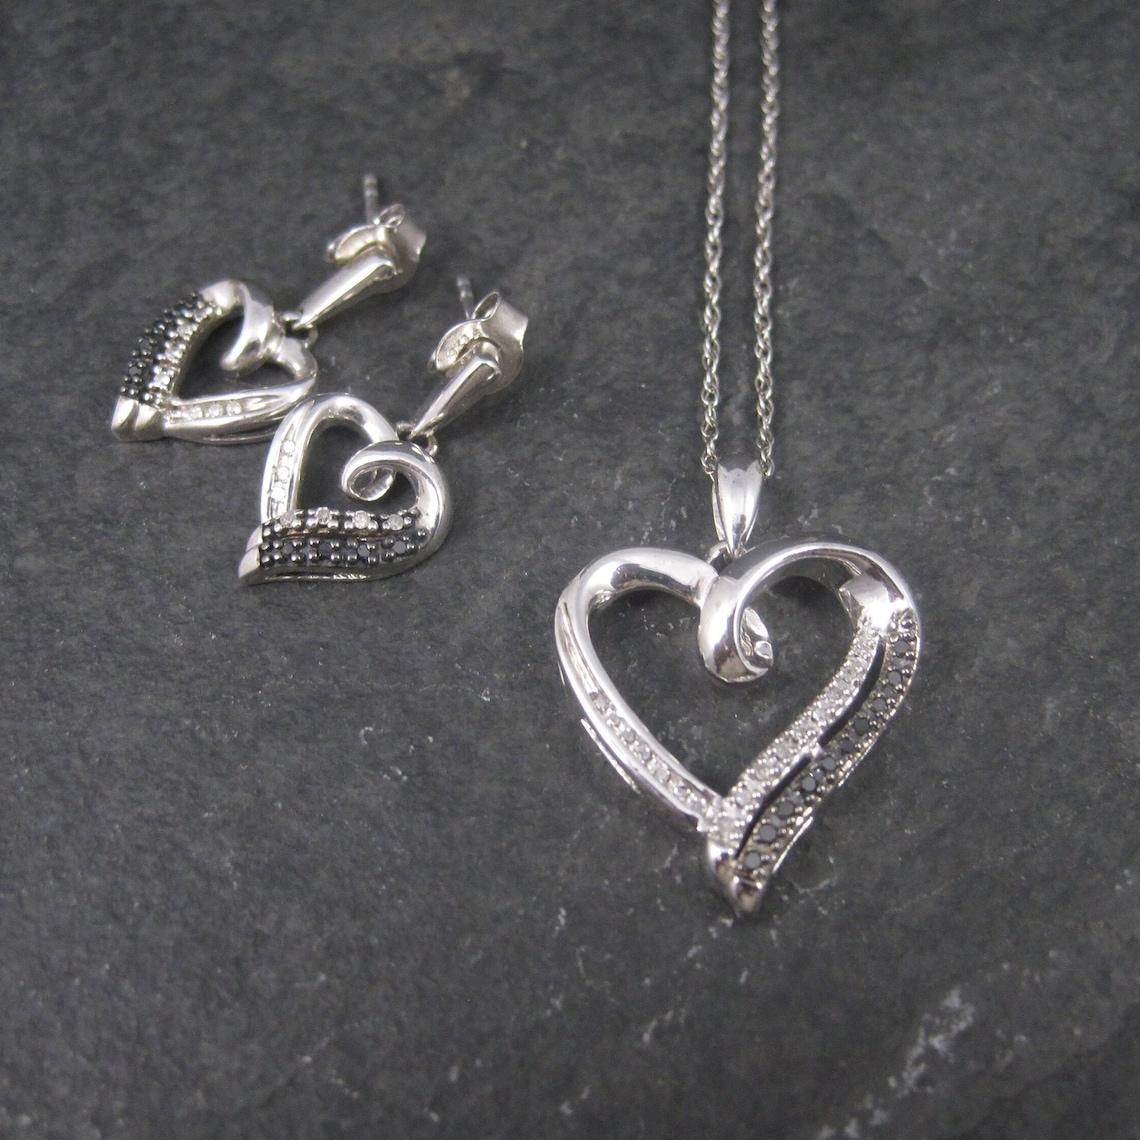 This beautiful jewelry set is sterling silver with black and white diamonds.

The pendant measures 3/4 by 1 inch.
It features an estimated .25 ctw in black and white diamonds.
Comes on an 18 inch sterling silver chain.

The earrings measure 1/2 by